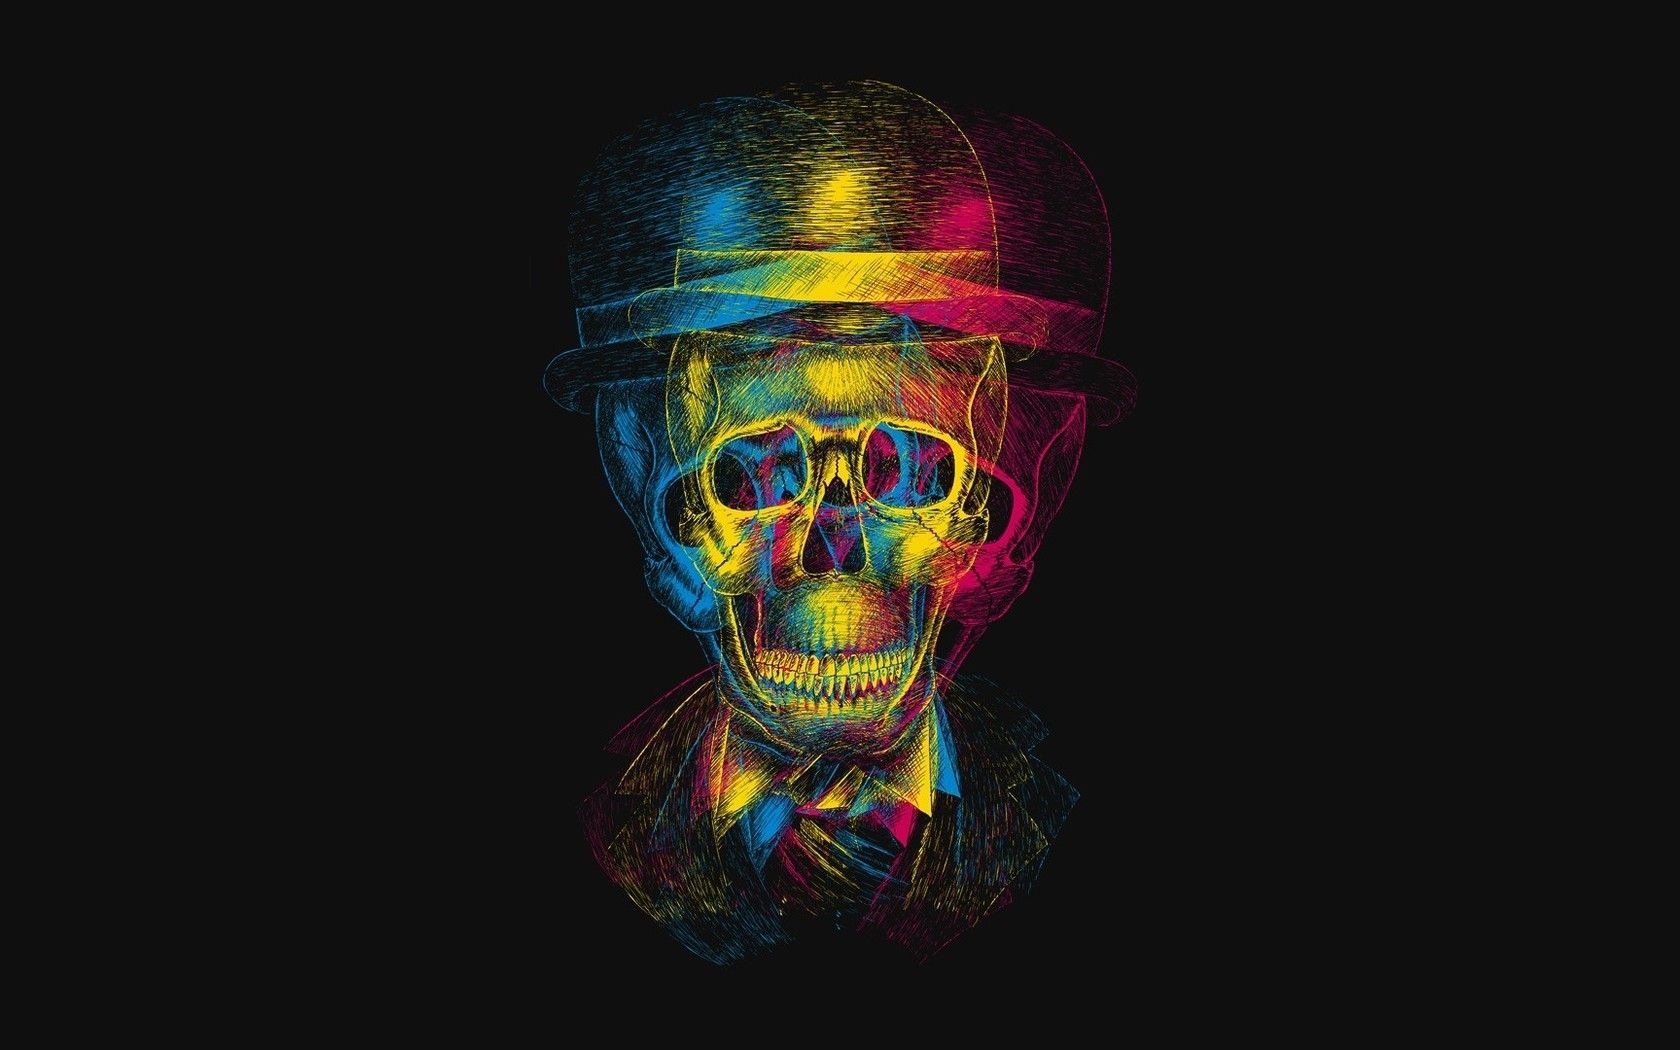 Skull in Hat wallpapers and images - wallpapers, pictures, photos